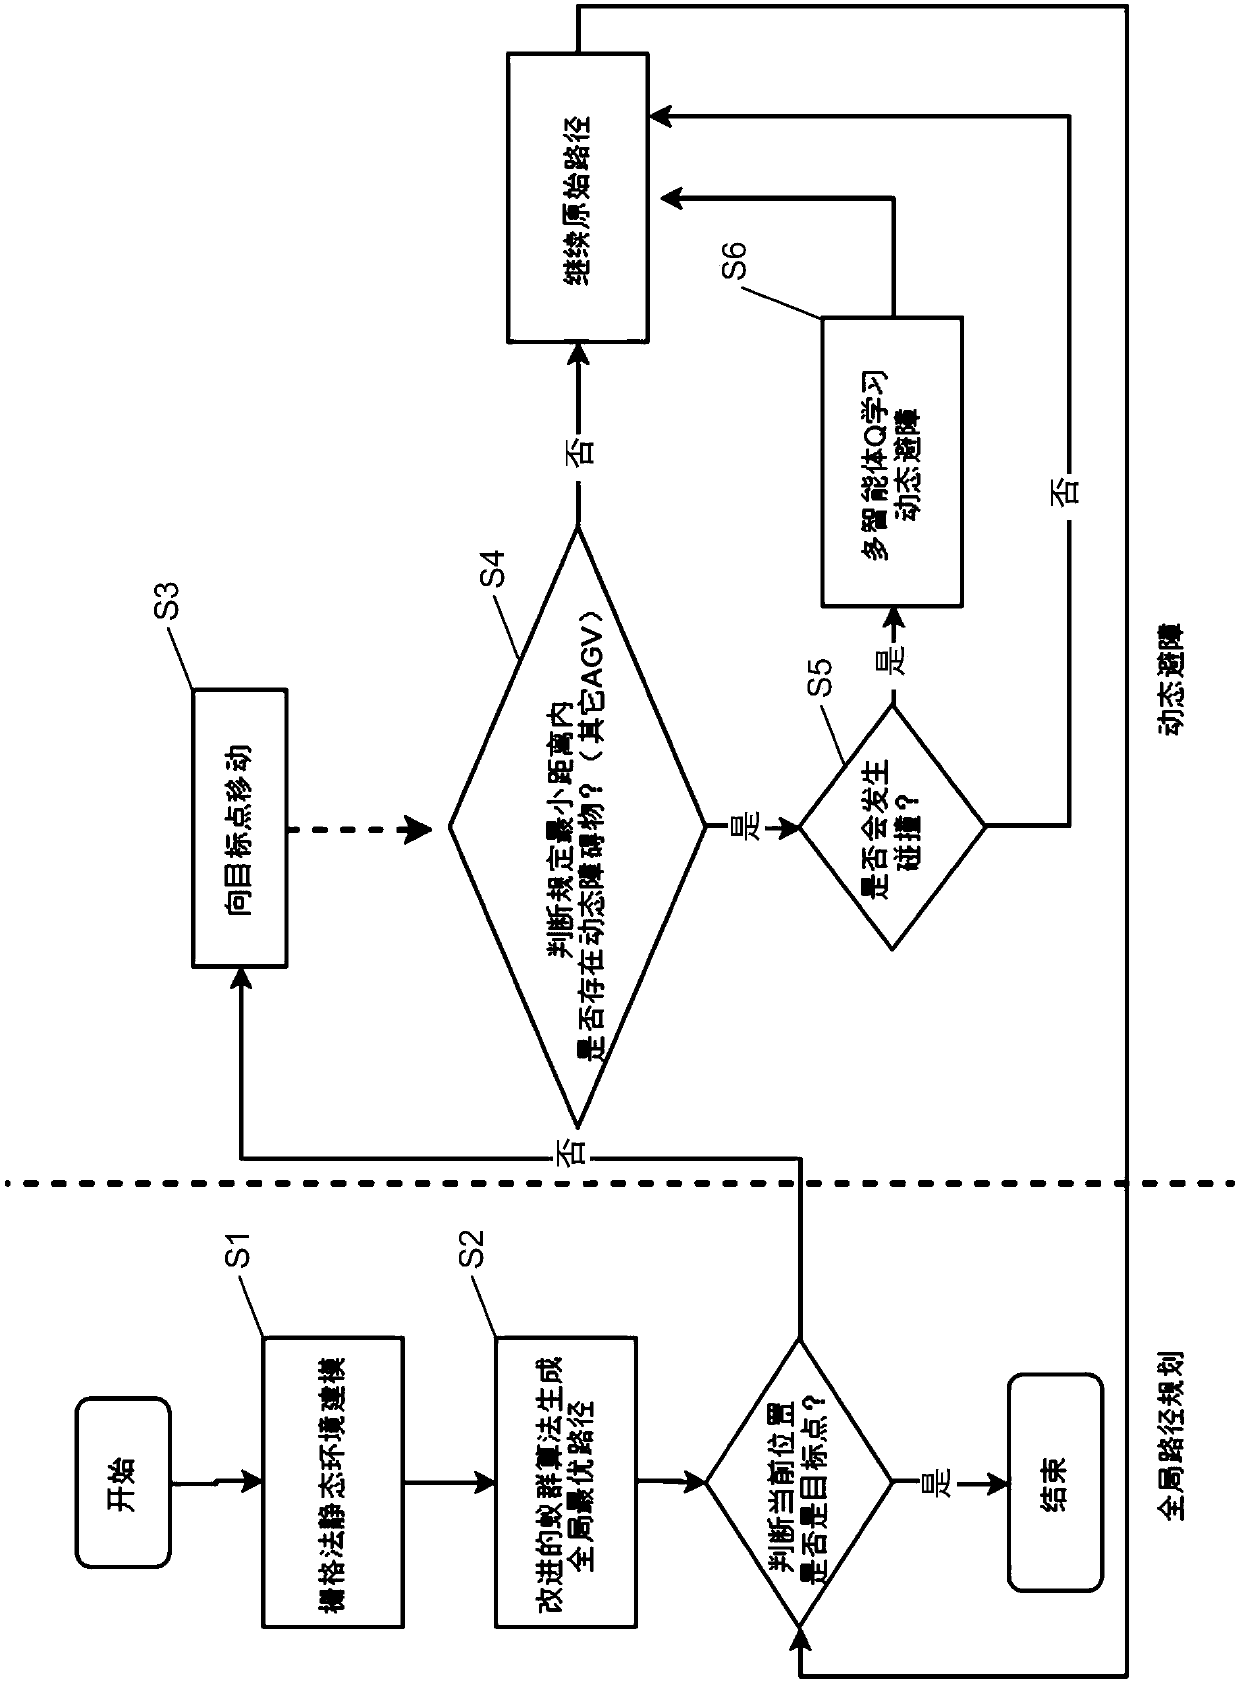 AGV (Automated Guided Vehicle) route planning method and system based on ant colony algorithm and multi-intelligent agent Q learning